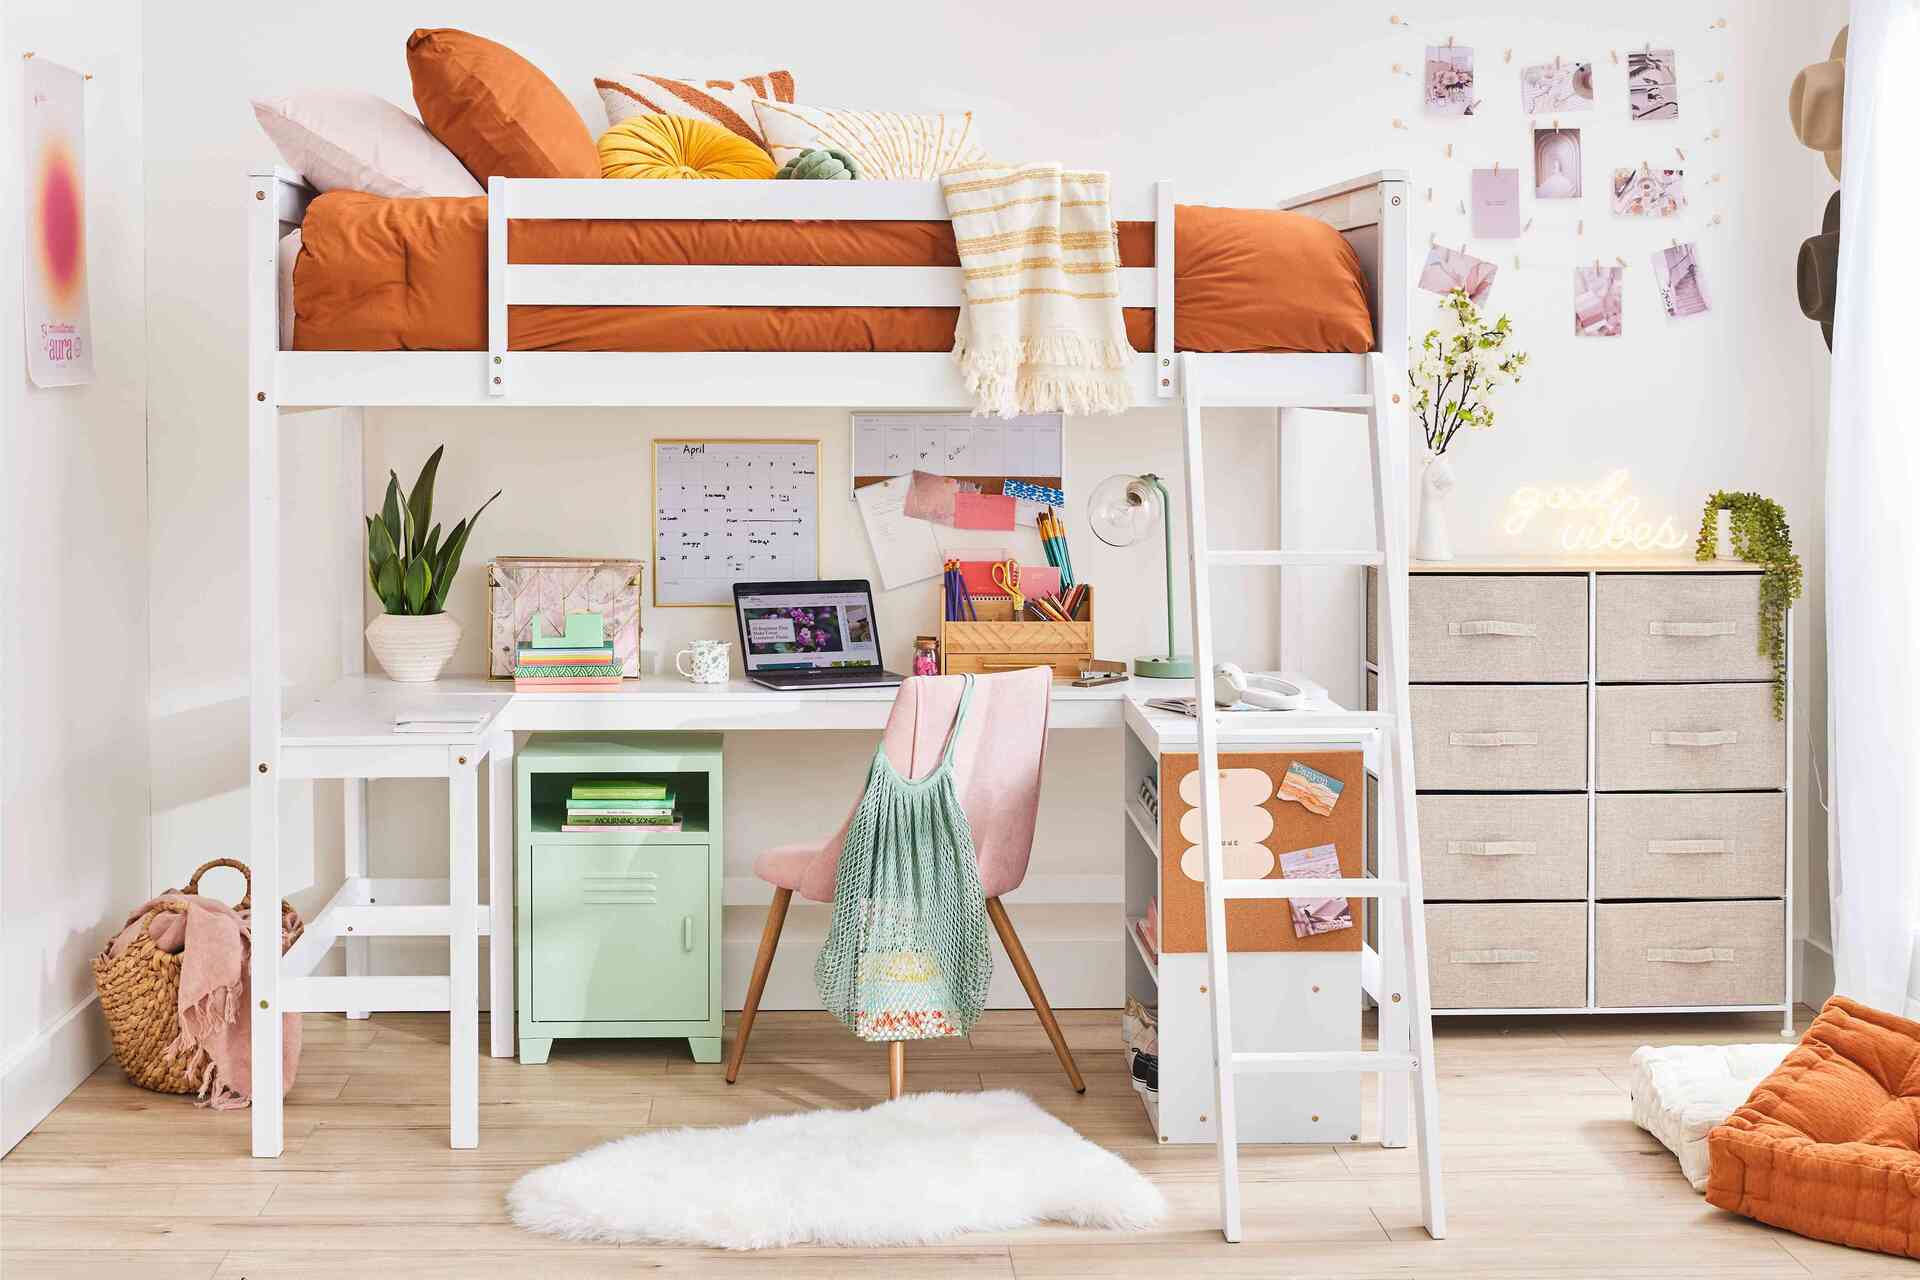 Dorm Room Ideas: 11 Ways To Make This Space Truly Your Own